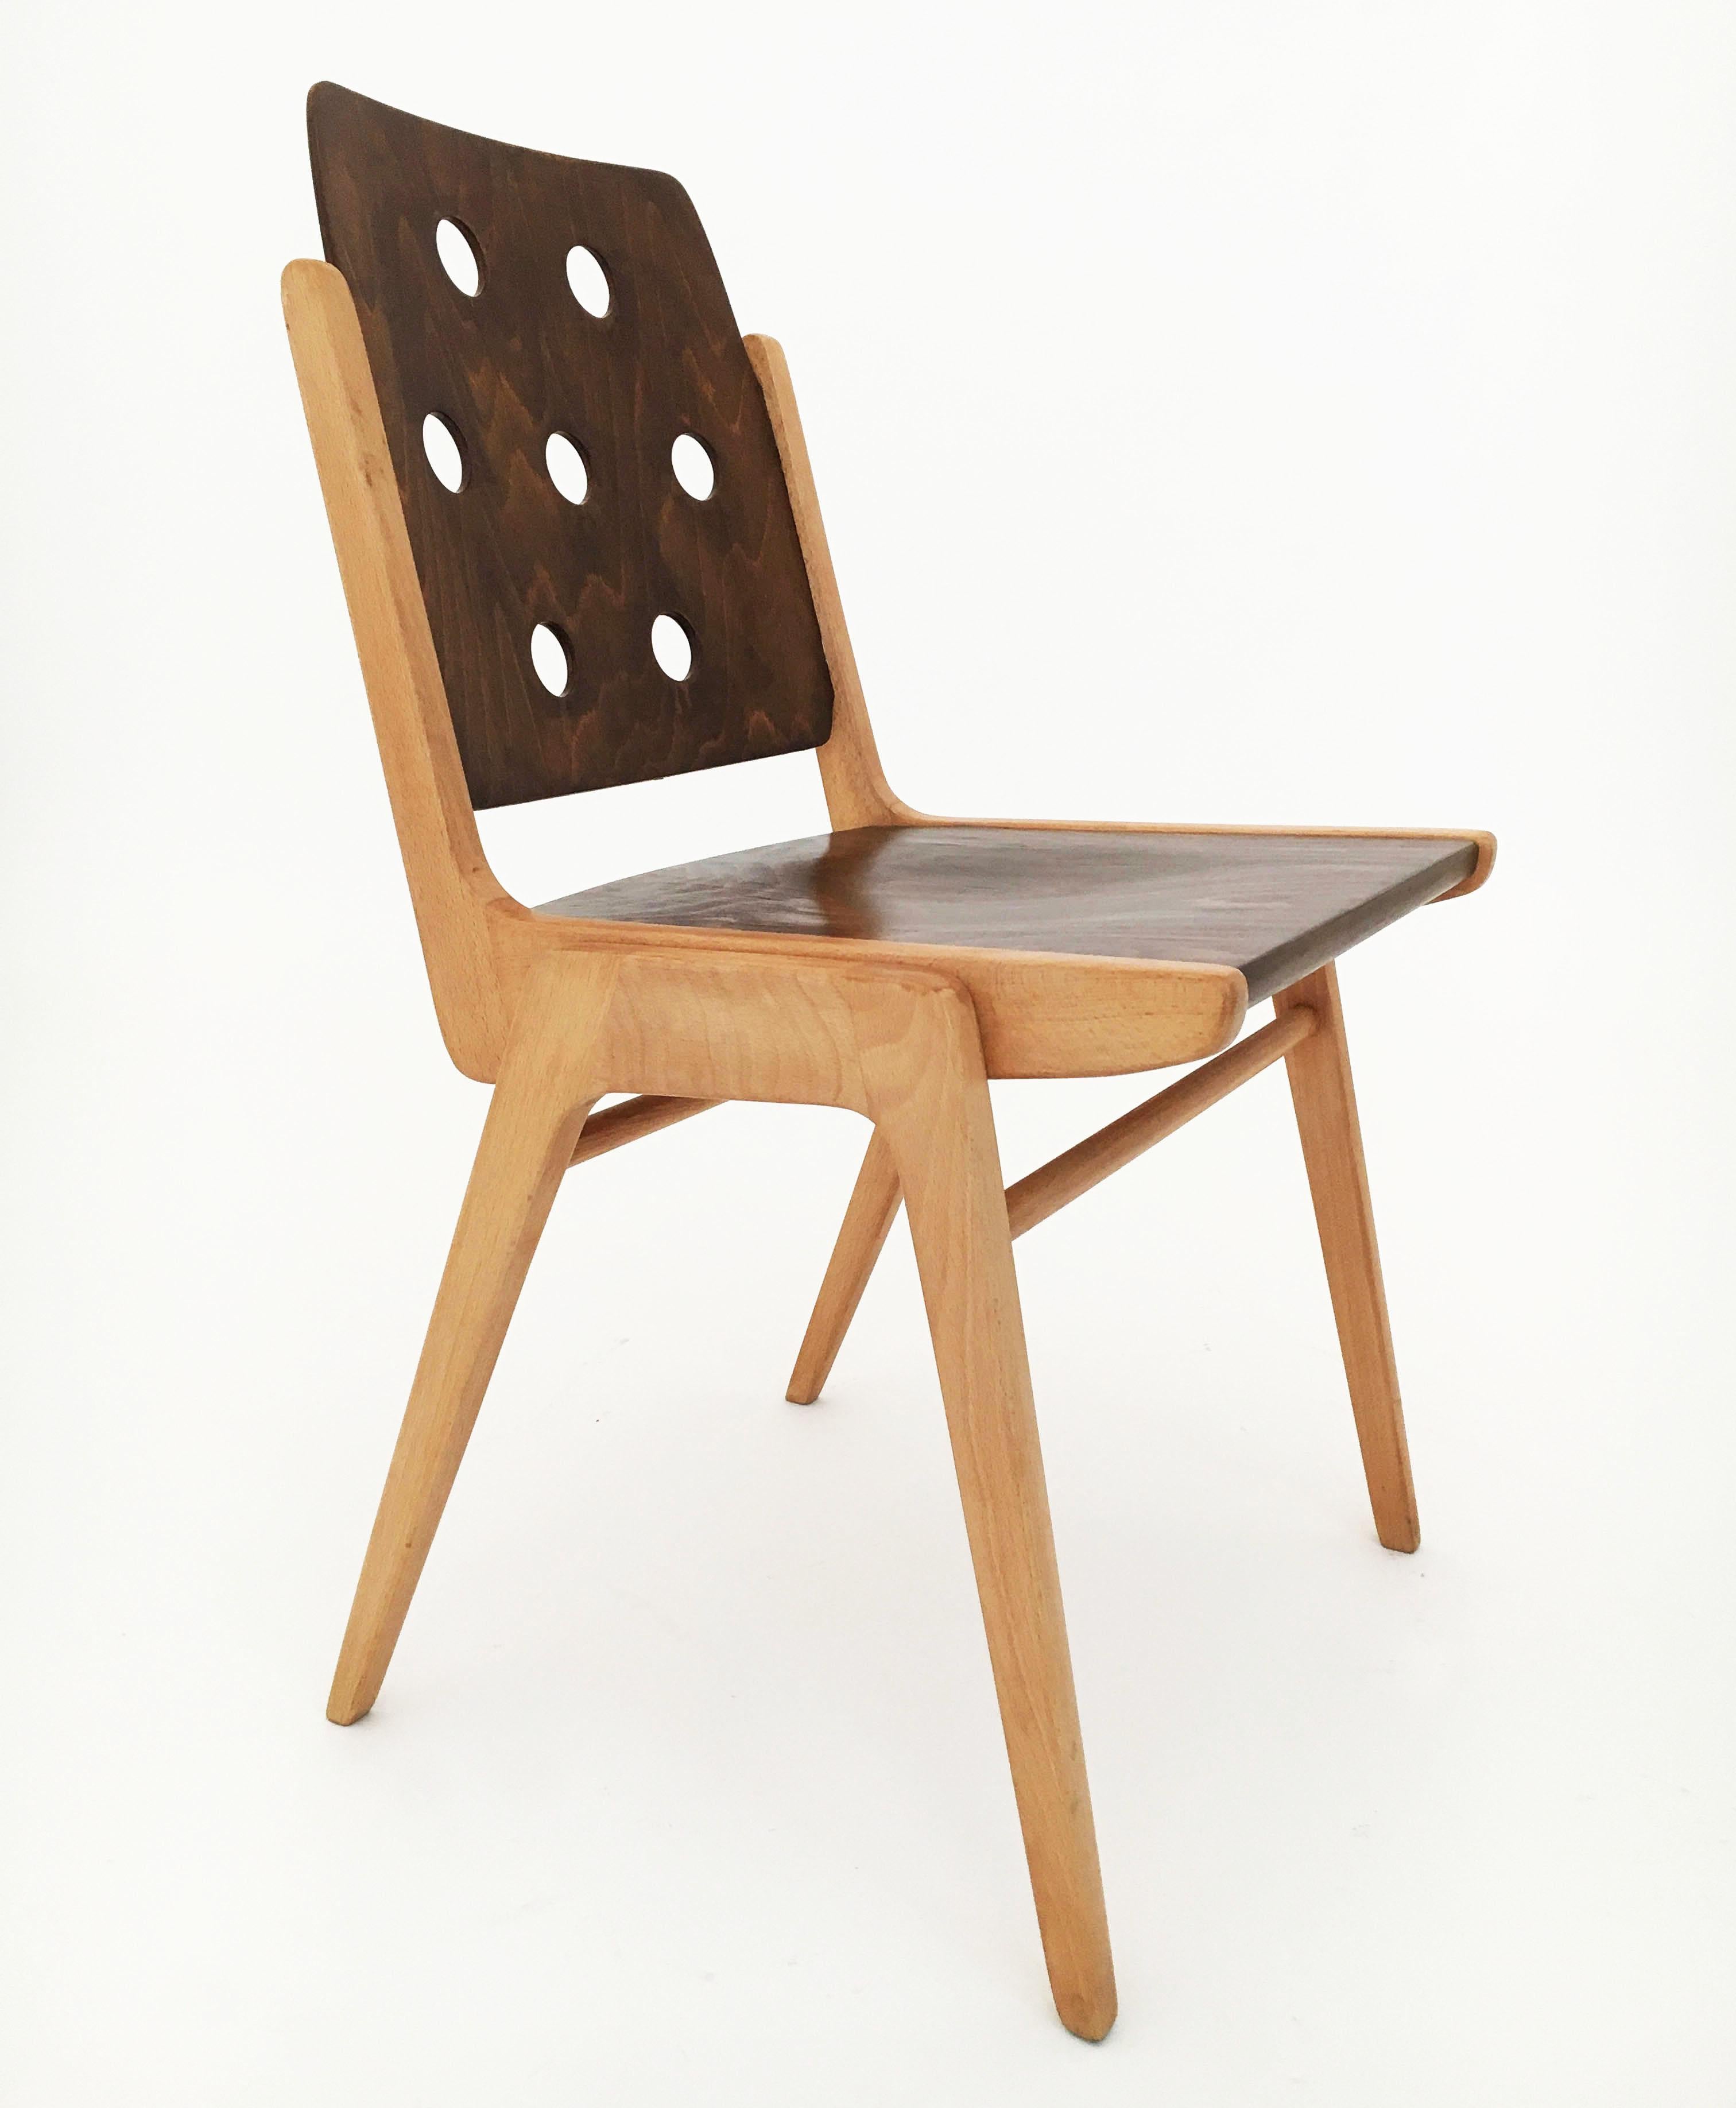 Stained Franz Schuster Stacking Chairs Model 'Maestro', Set of Six, Austria 1950s